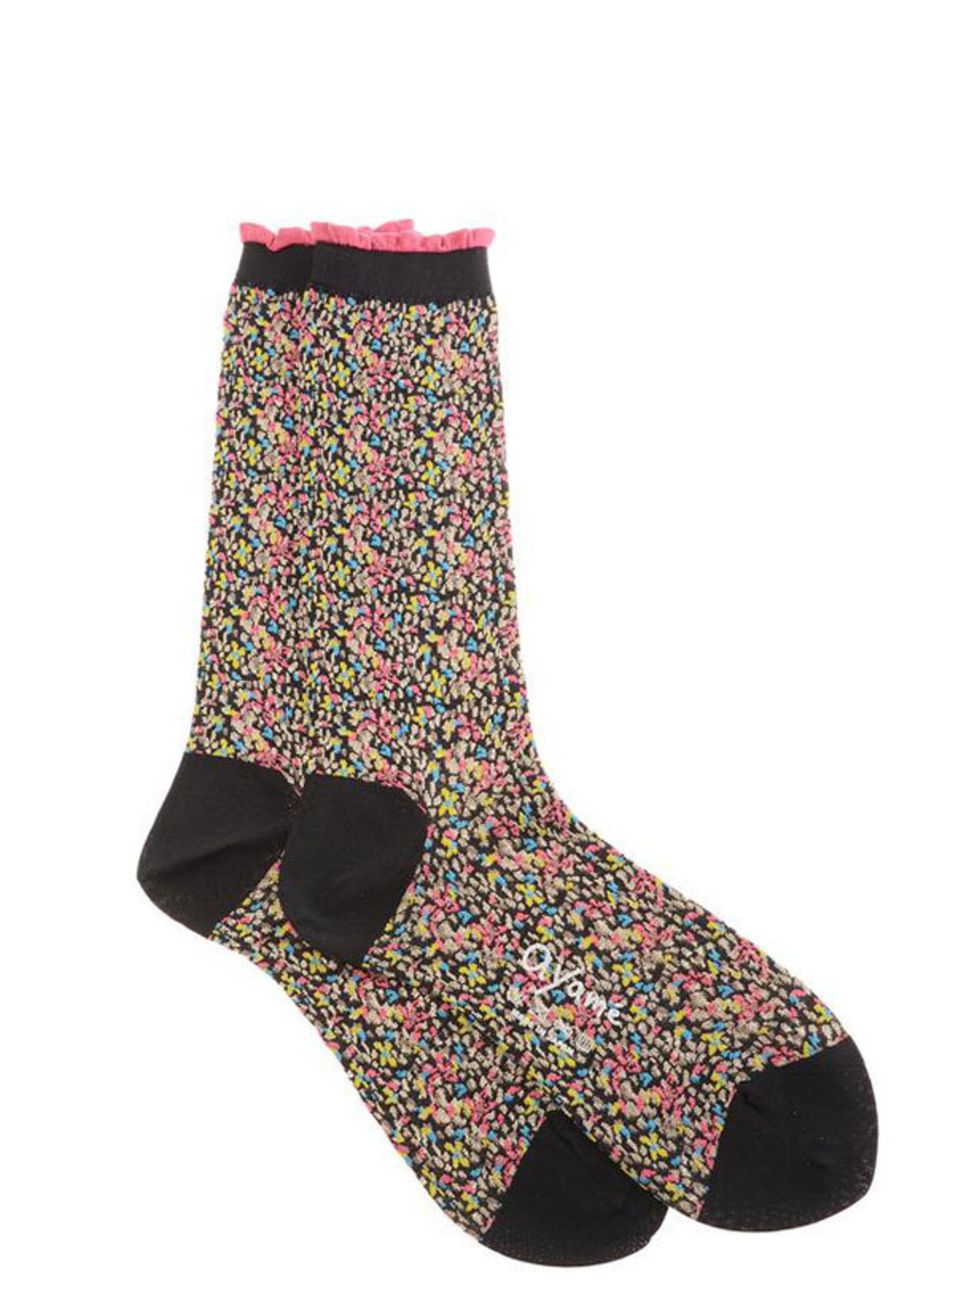 <p>Ayame multi-coloured patterned socks, £45, at <a href="http://www.brownsfashion.com/Product/Muti-coloured_blister_knit_socks/Product.aspx?p=3461374">Browns</a></p>